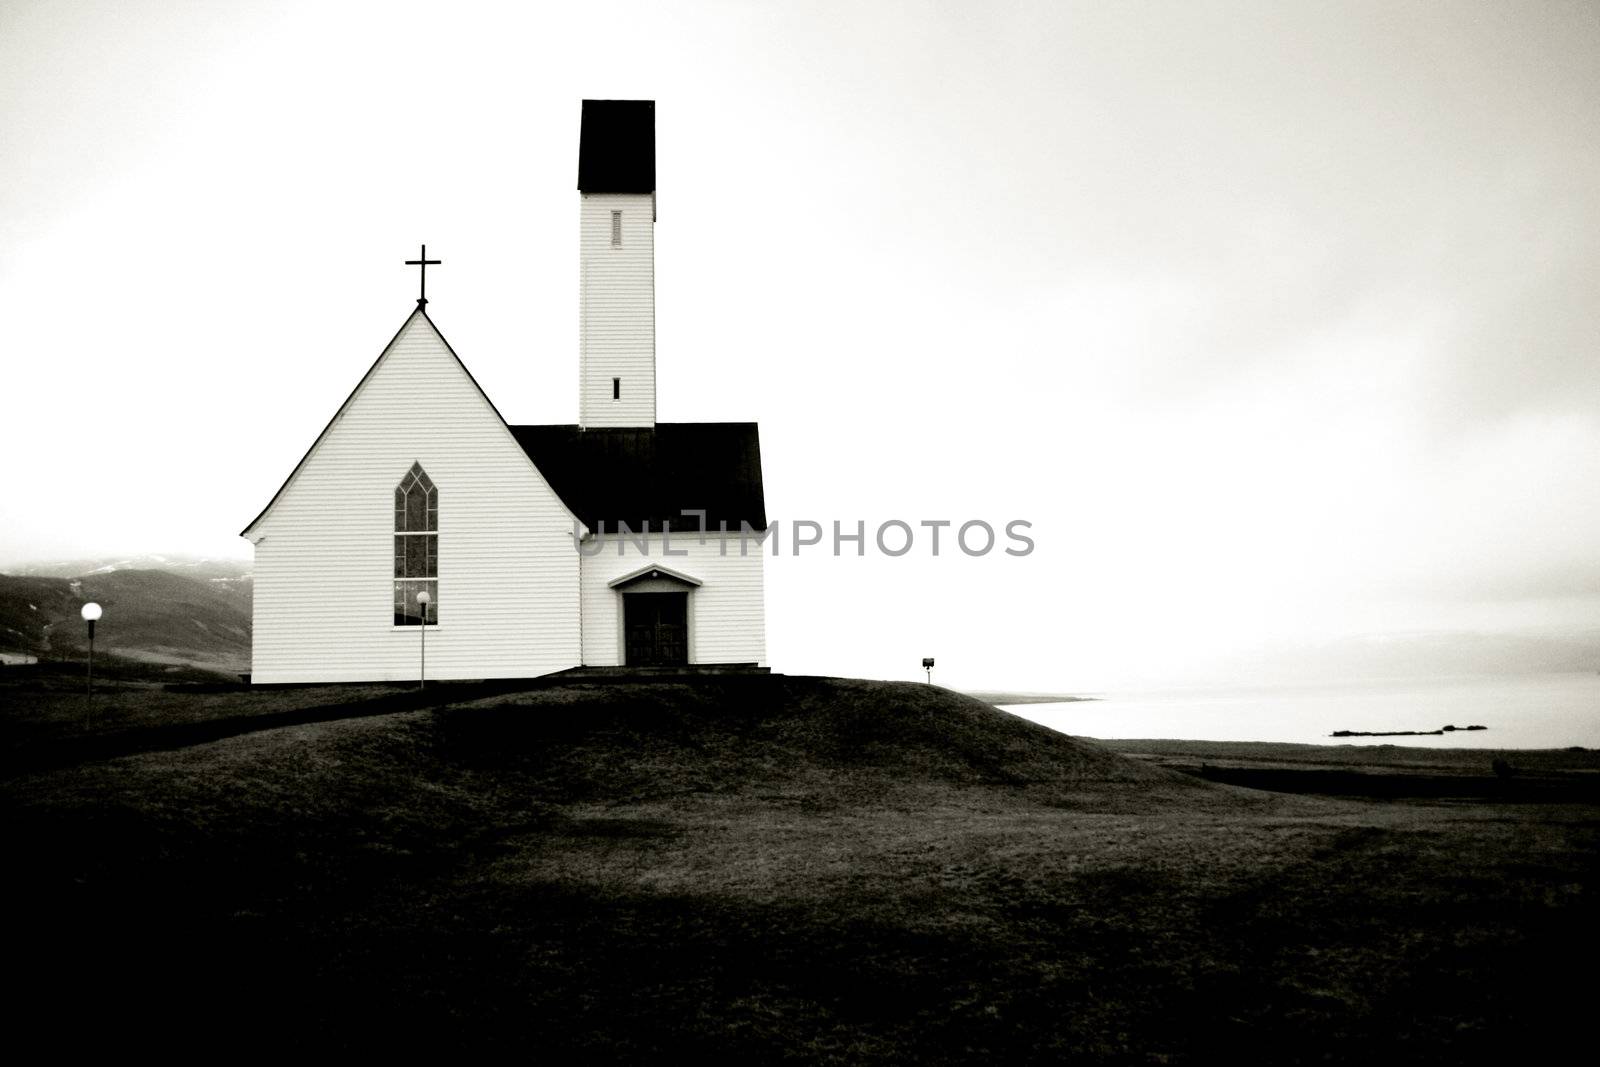 small white church by seaside, december, Iceland

